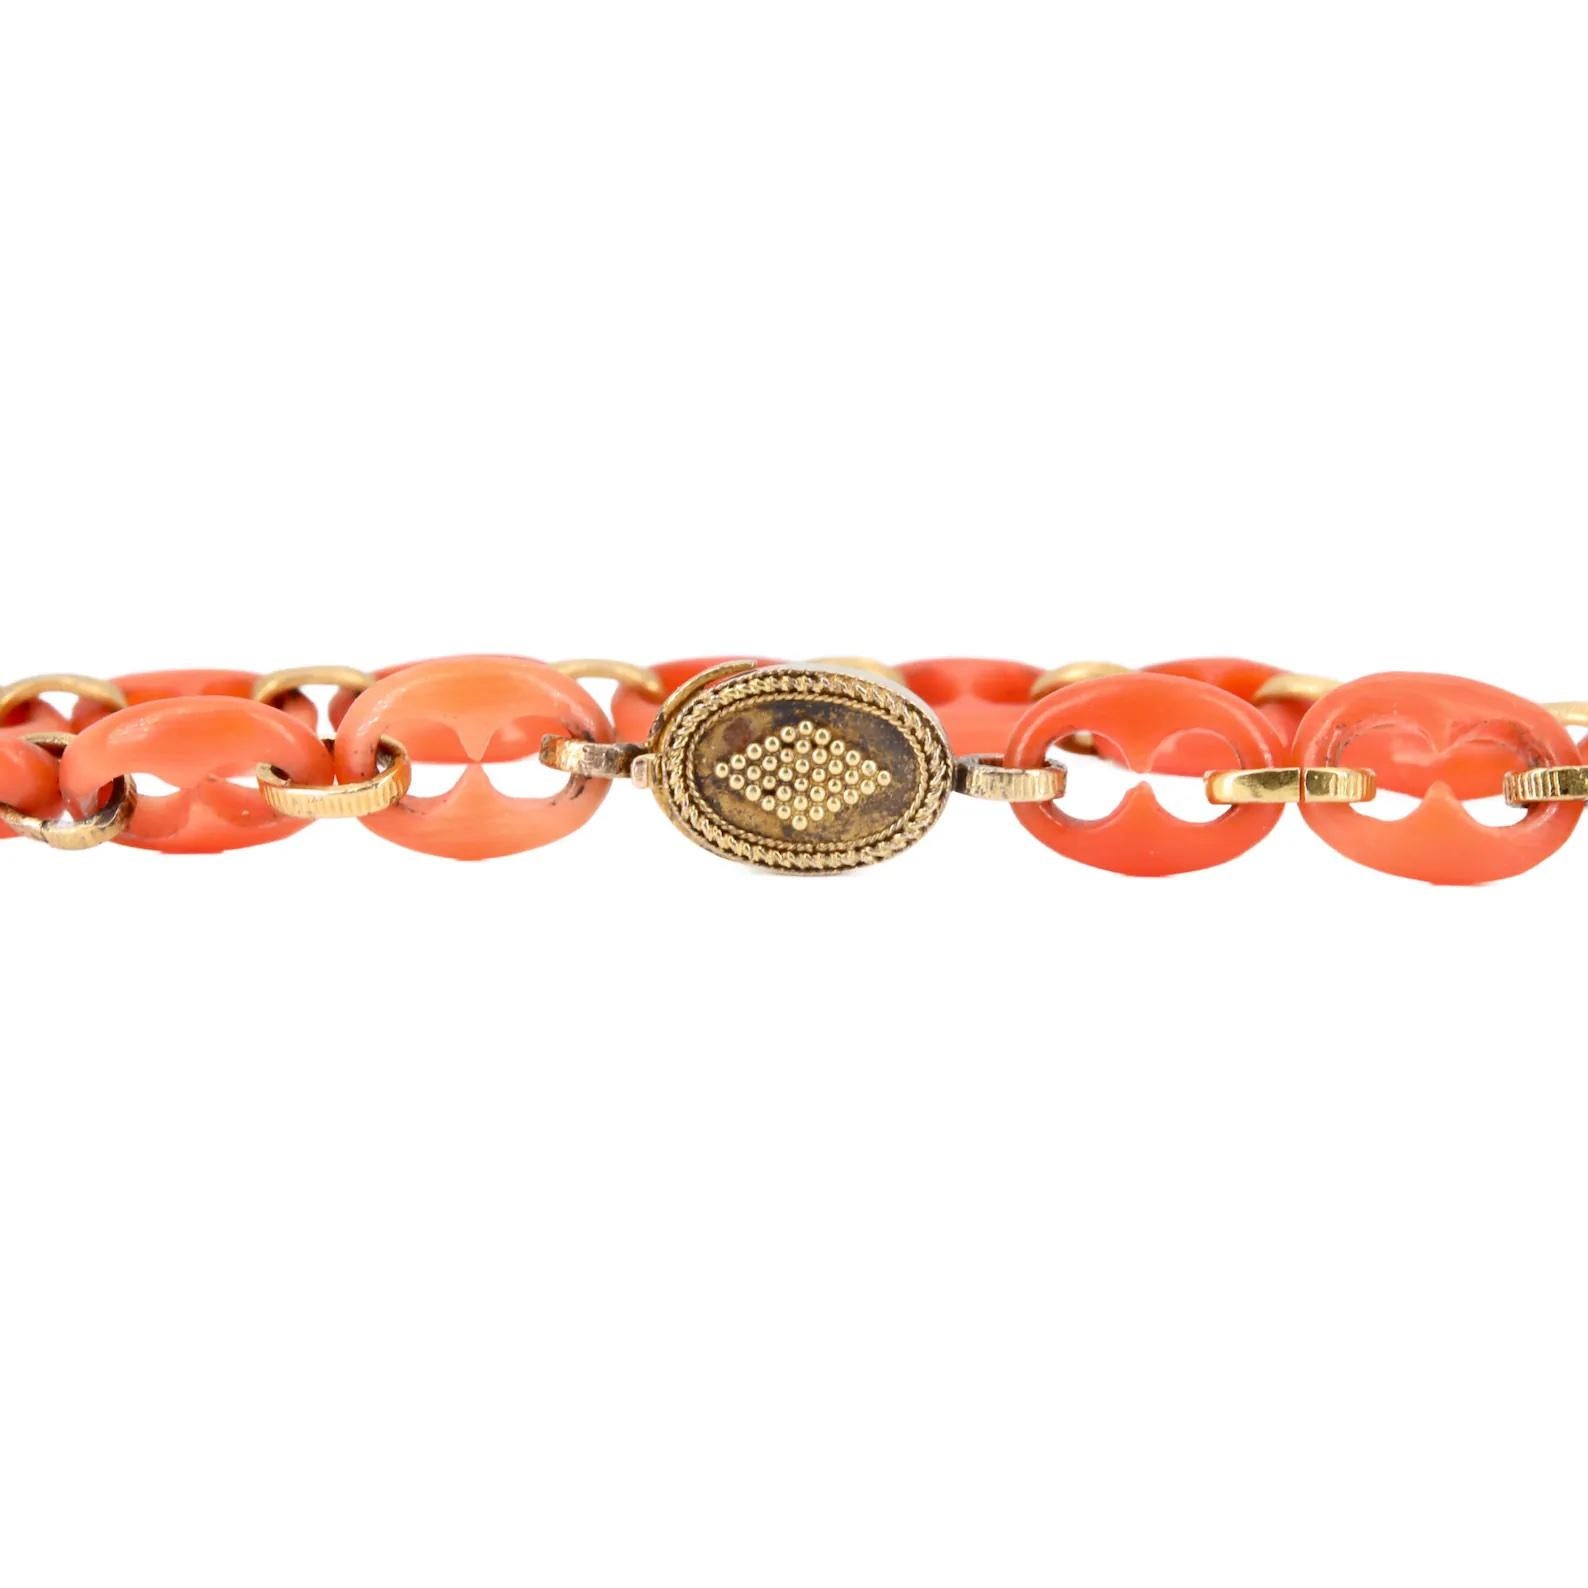 Victorian An Italian victorian period handmade carved coral link bracelet with 18 karat go For Sale